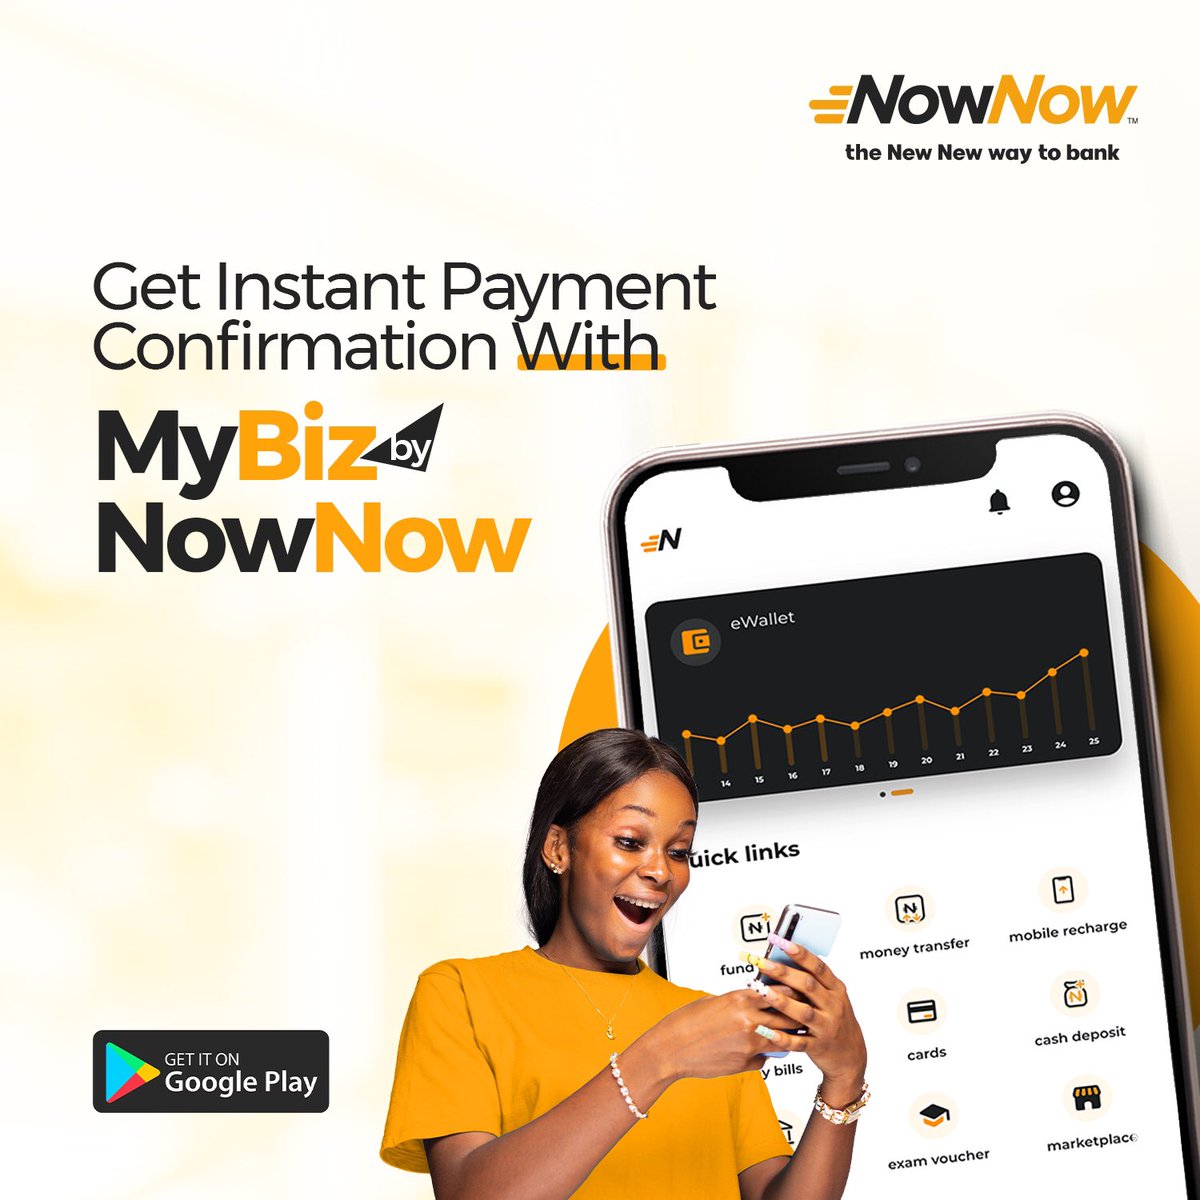 No more waiting for payment confirmation! With MyBizbyNowNow, you get instant confirmation for all your transactions.

Download MyBizbyNowNow and experience hassle-free payments.

#NowNow #InstantPayment